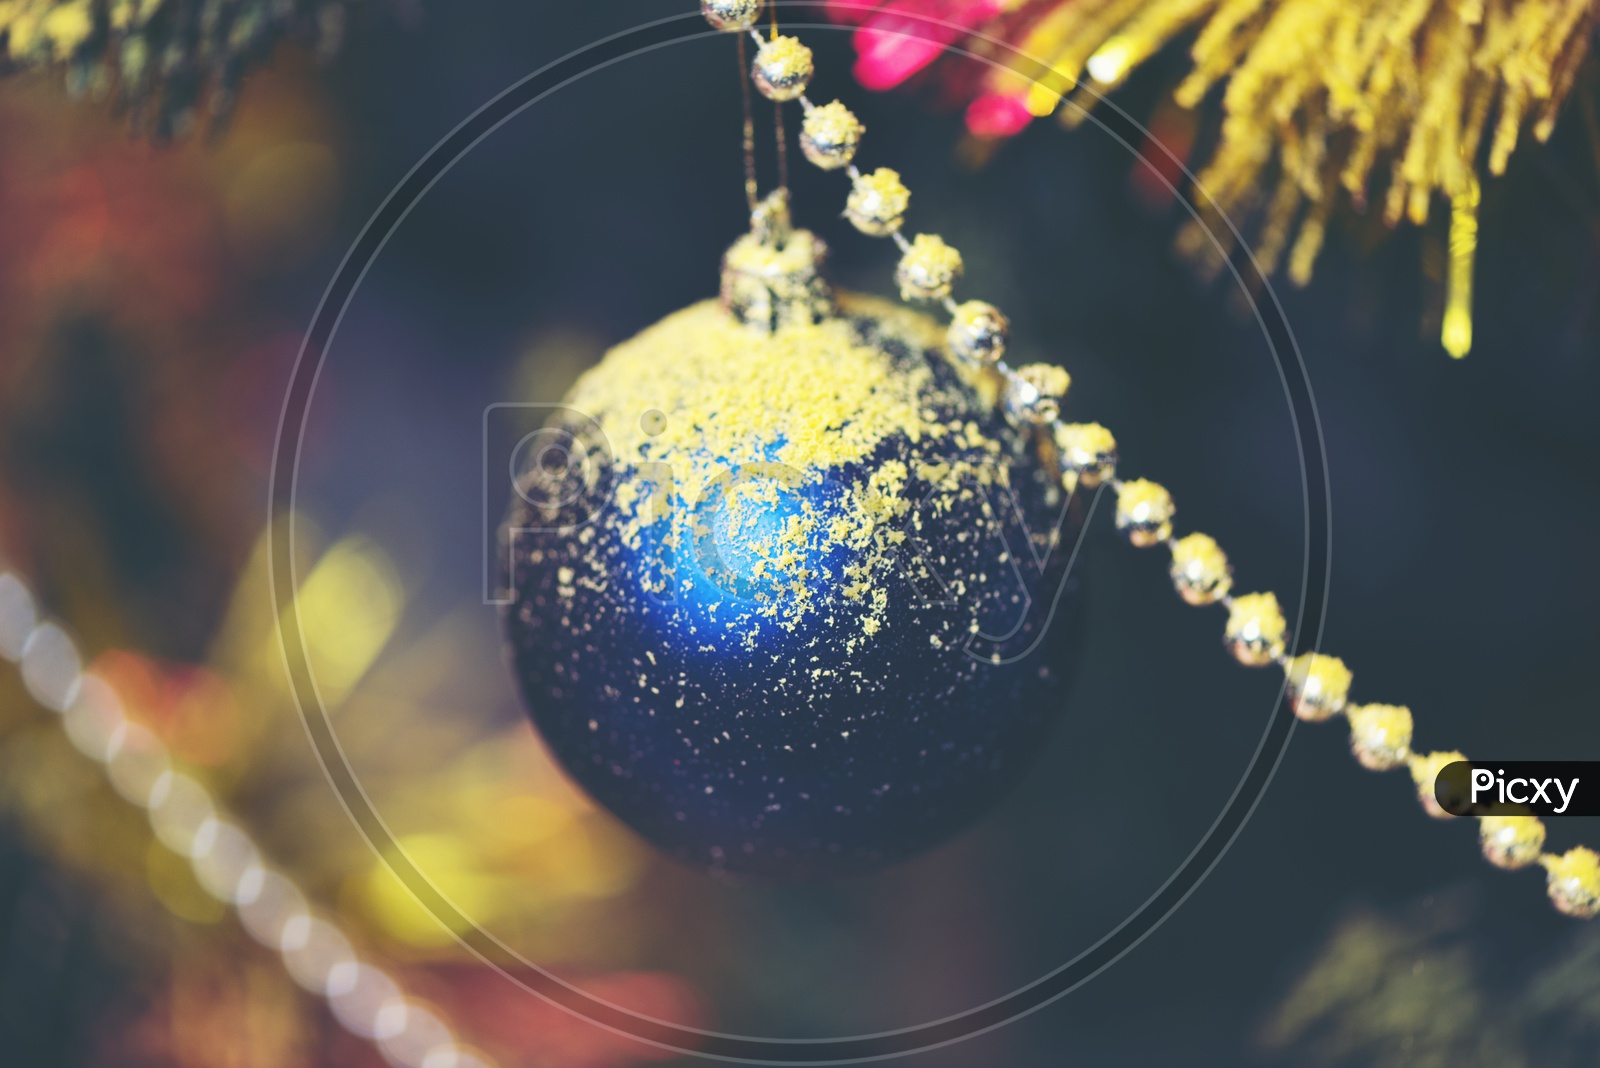 Decorated Christmas  Tree And Gift With Led Bokeh Background , templates For Christmas Festival  and New Year